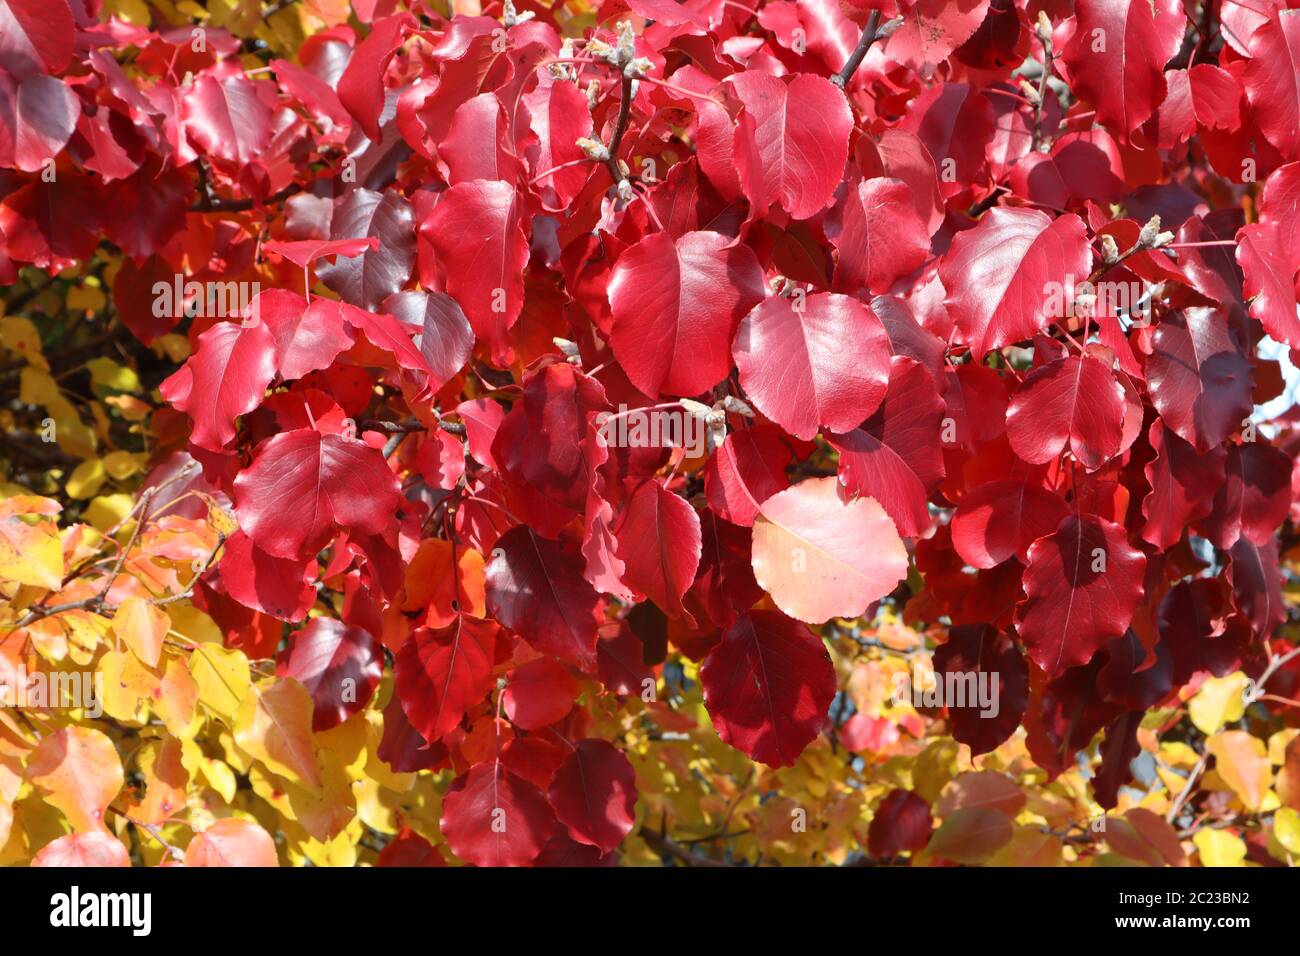 Vivid and stunning crimson red and gold autumn leaves show their changing colors in the fall sunlight Stock Photo